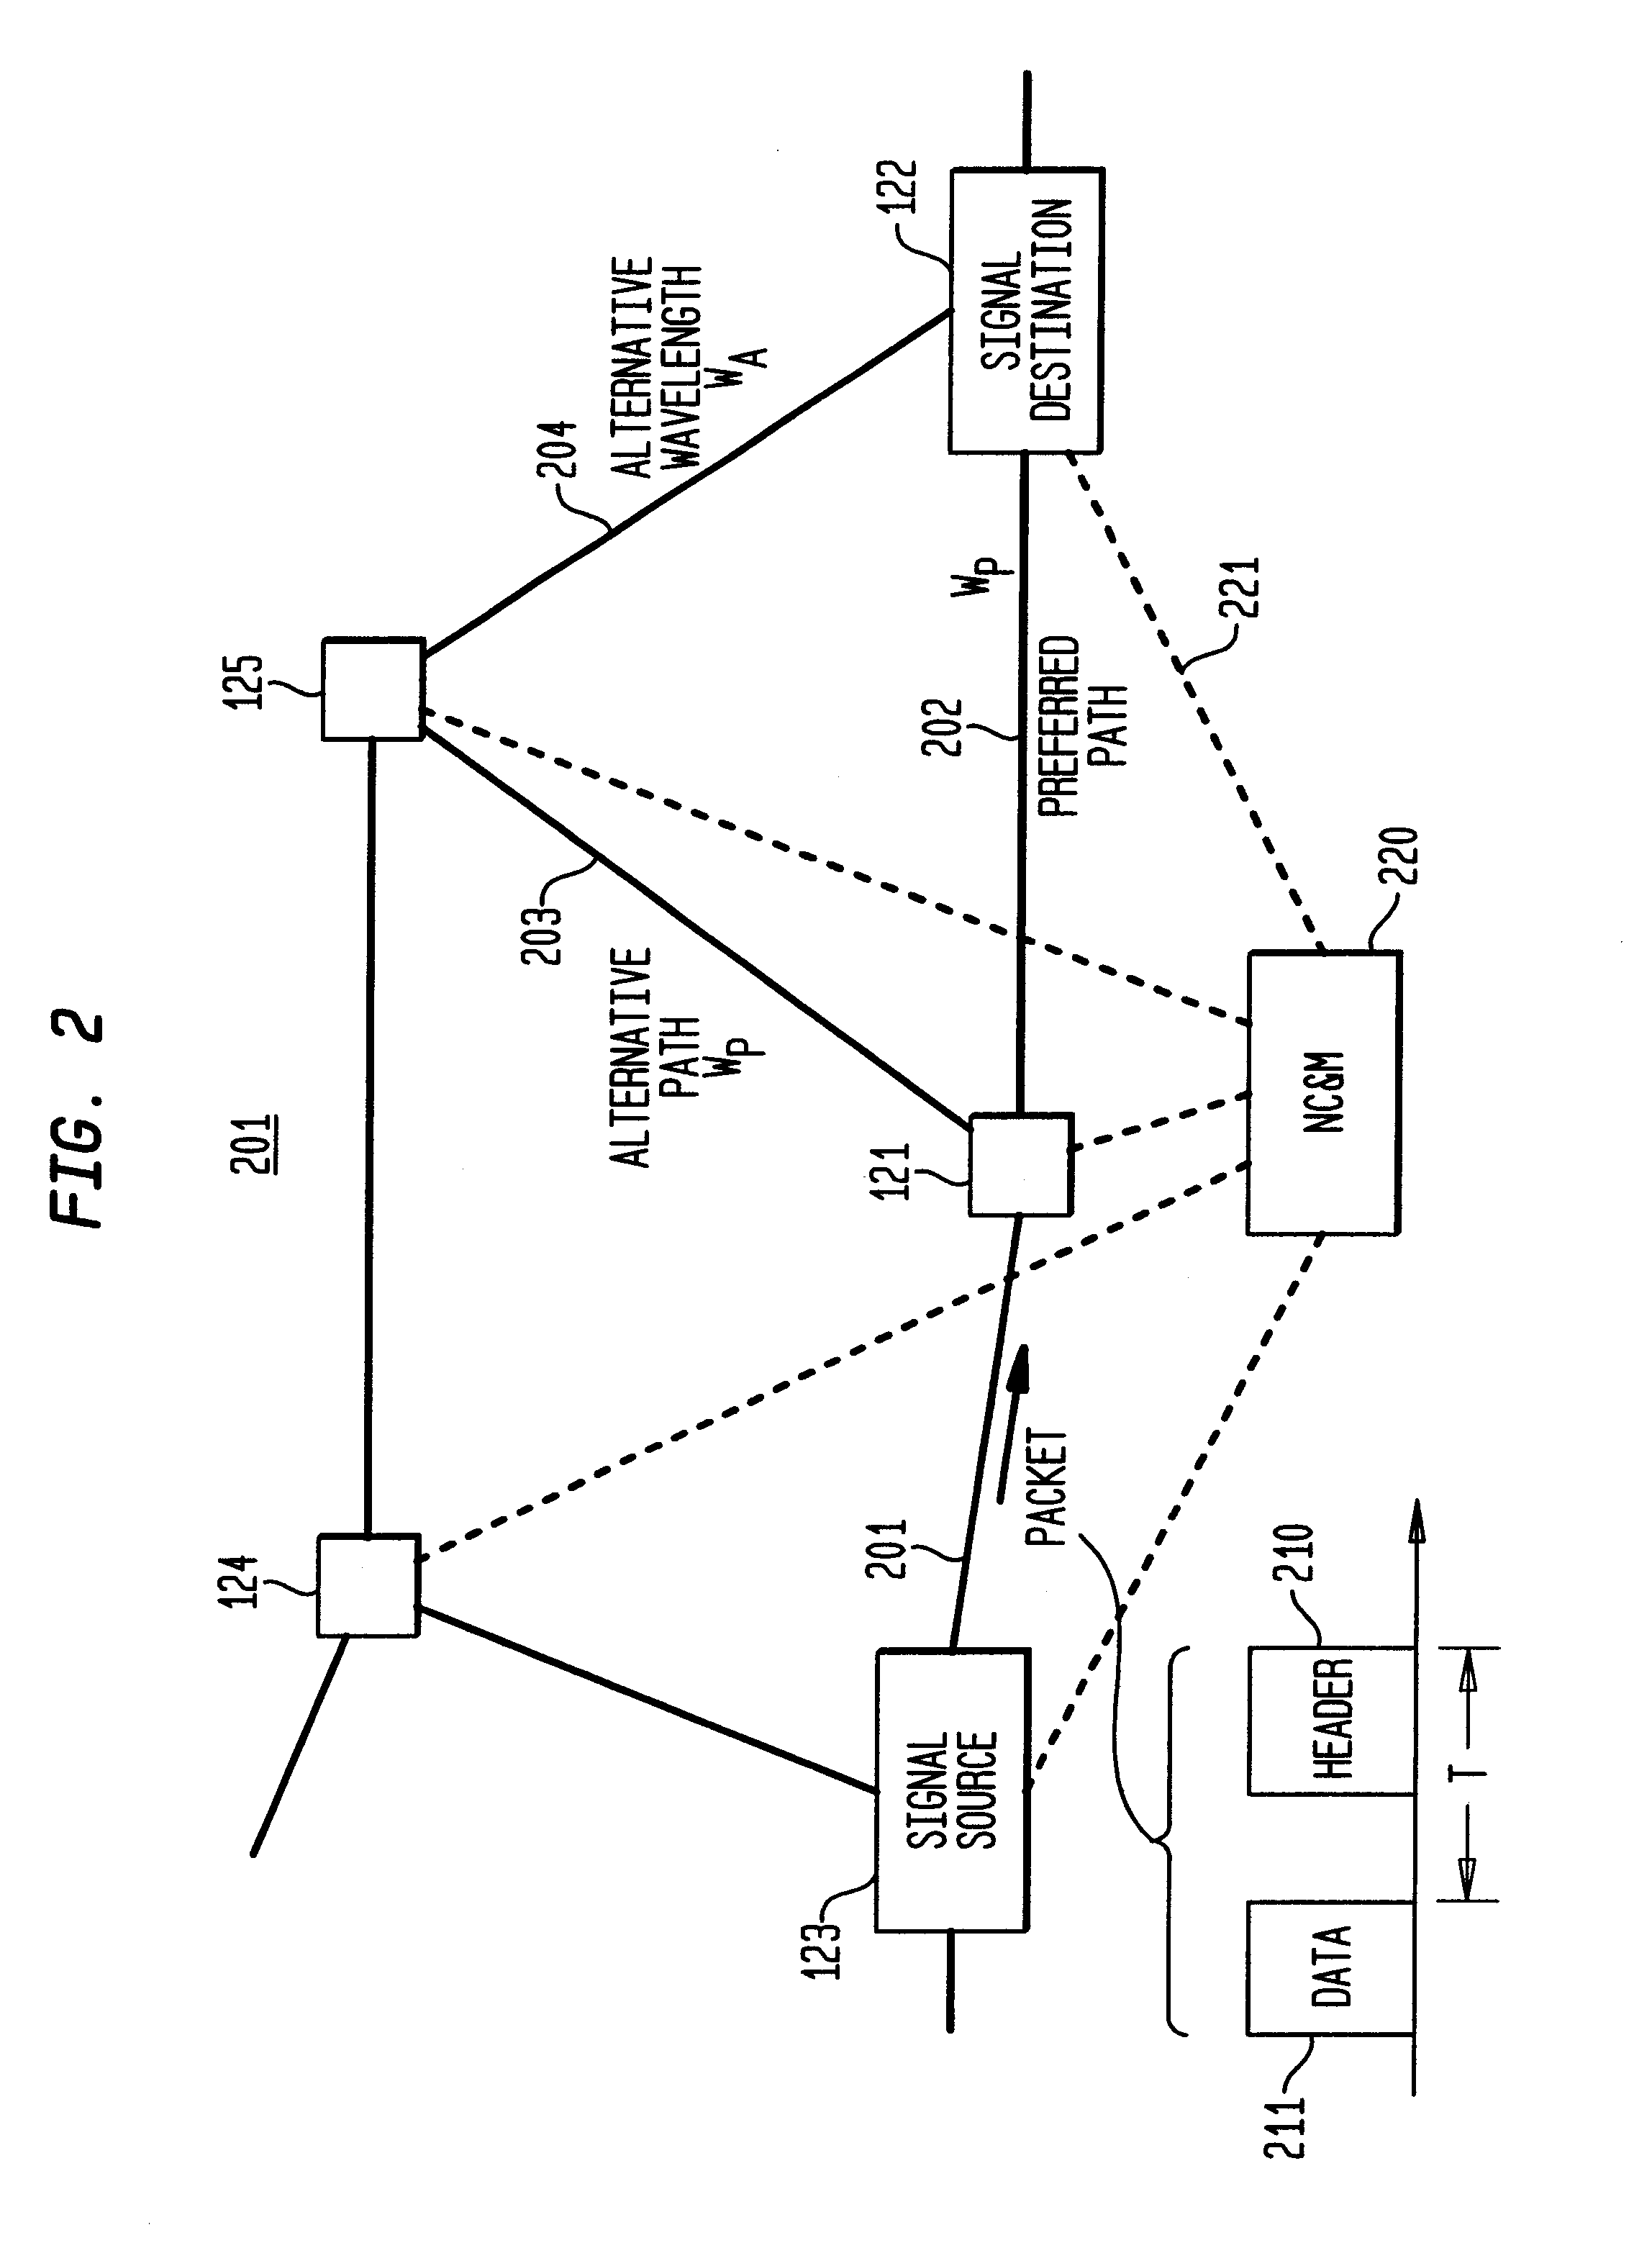 High-throughput, low-latency next generation internet networks using optical label switching and high-speed optical header generation, detection and reinsertion